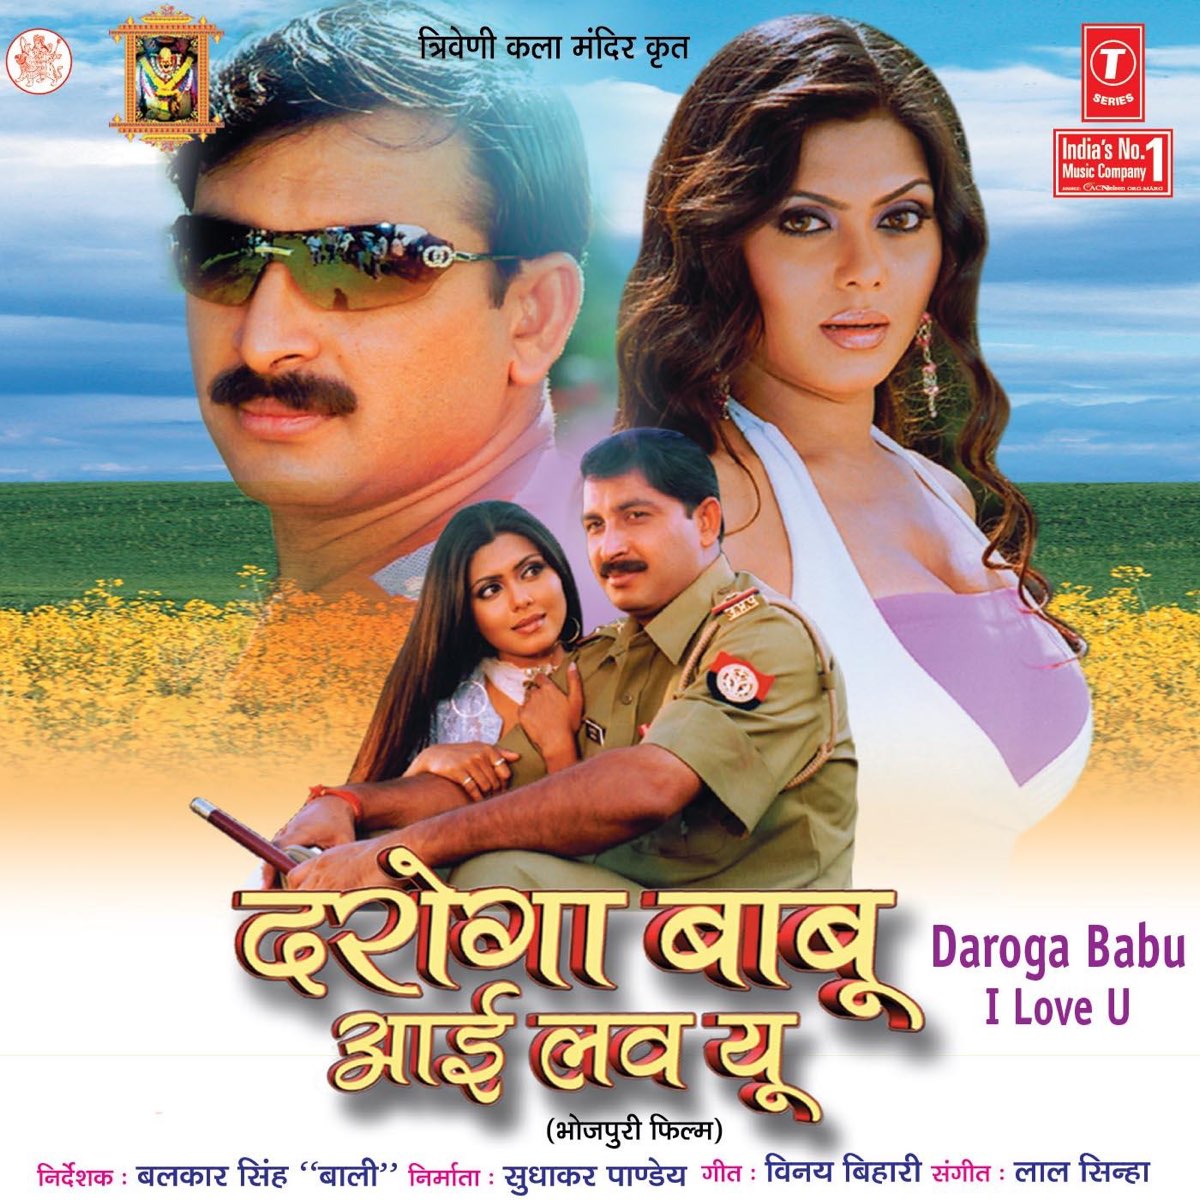 Daroga Babu I Love You (Original Motion Picture Soundtrack) by Lal Sinha on  Apple Music